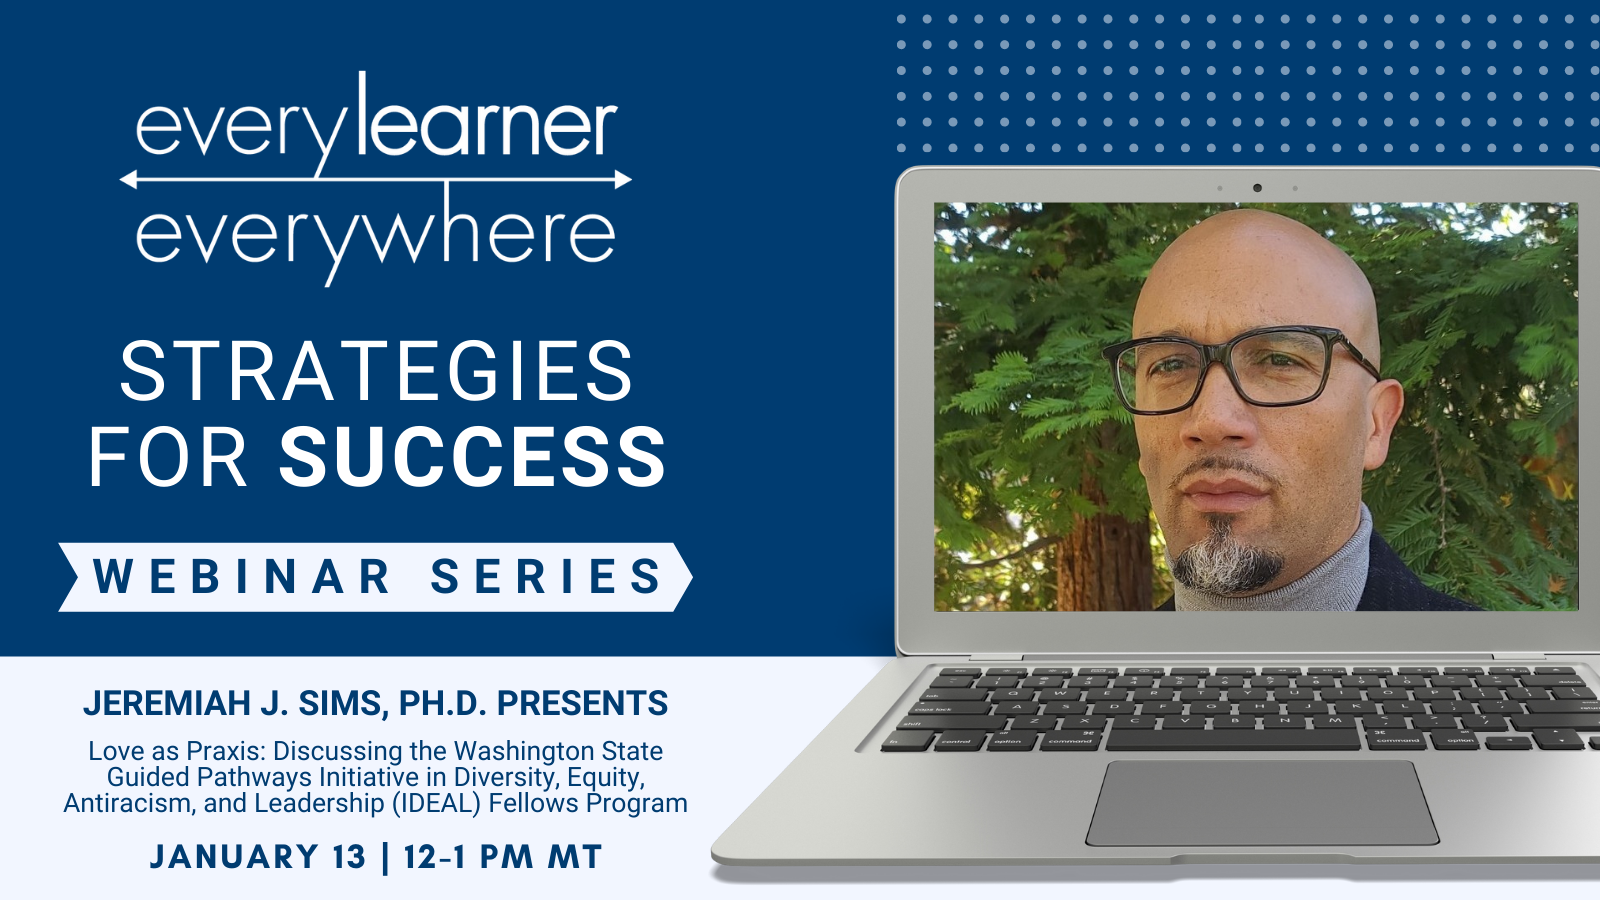 Webinar Series with Jeremiah Sims